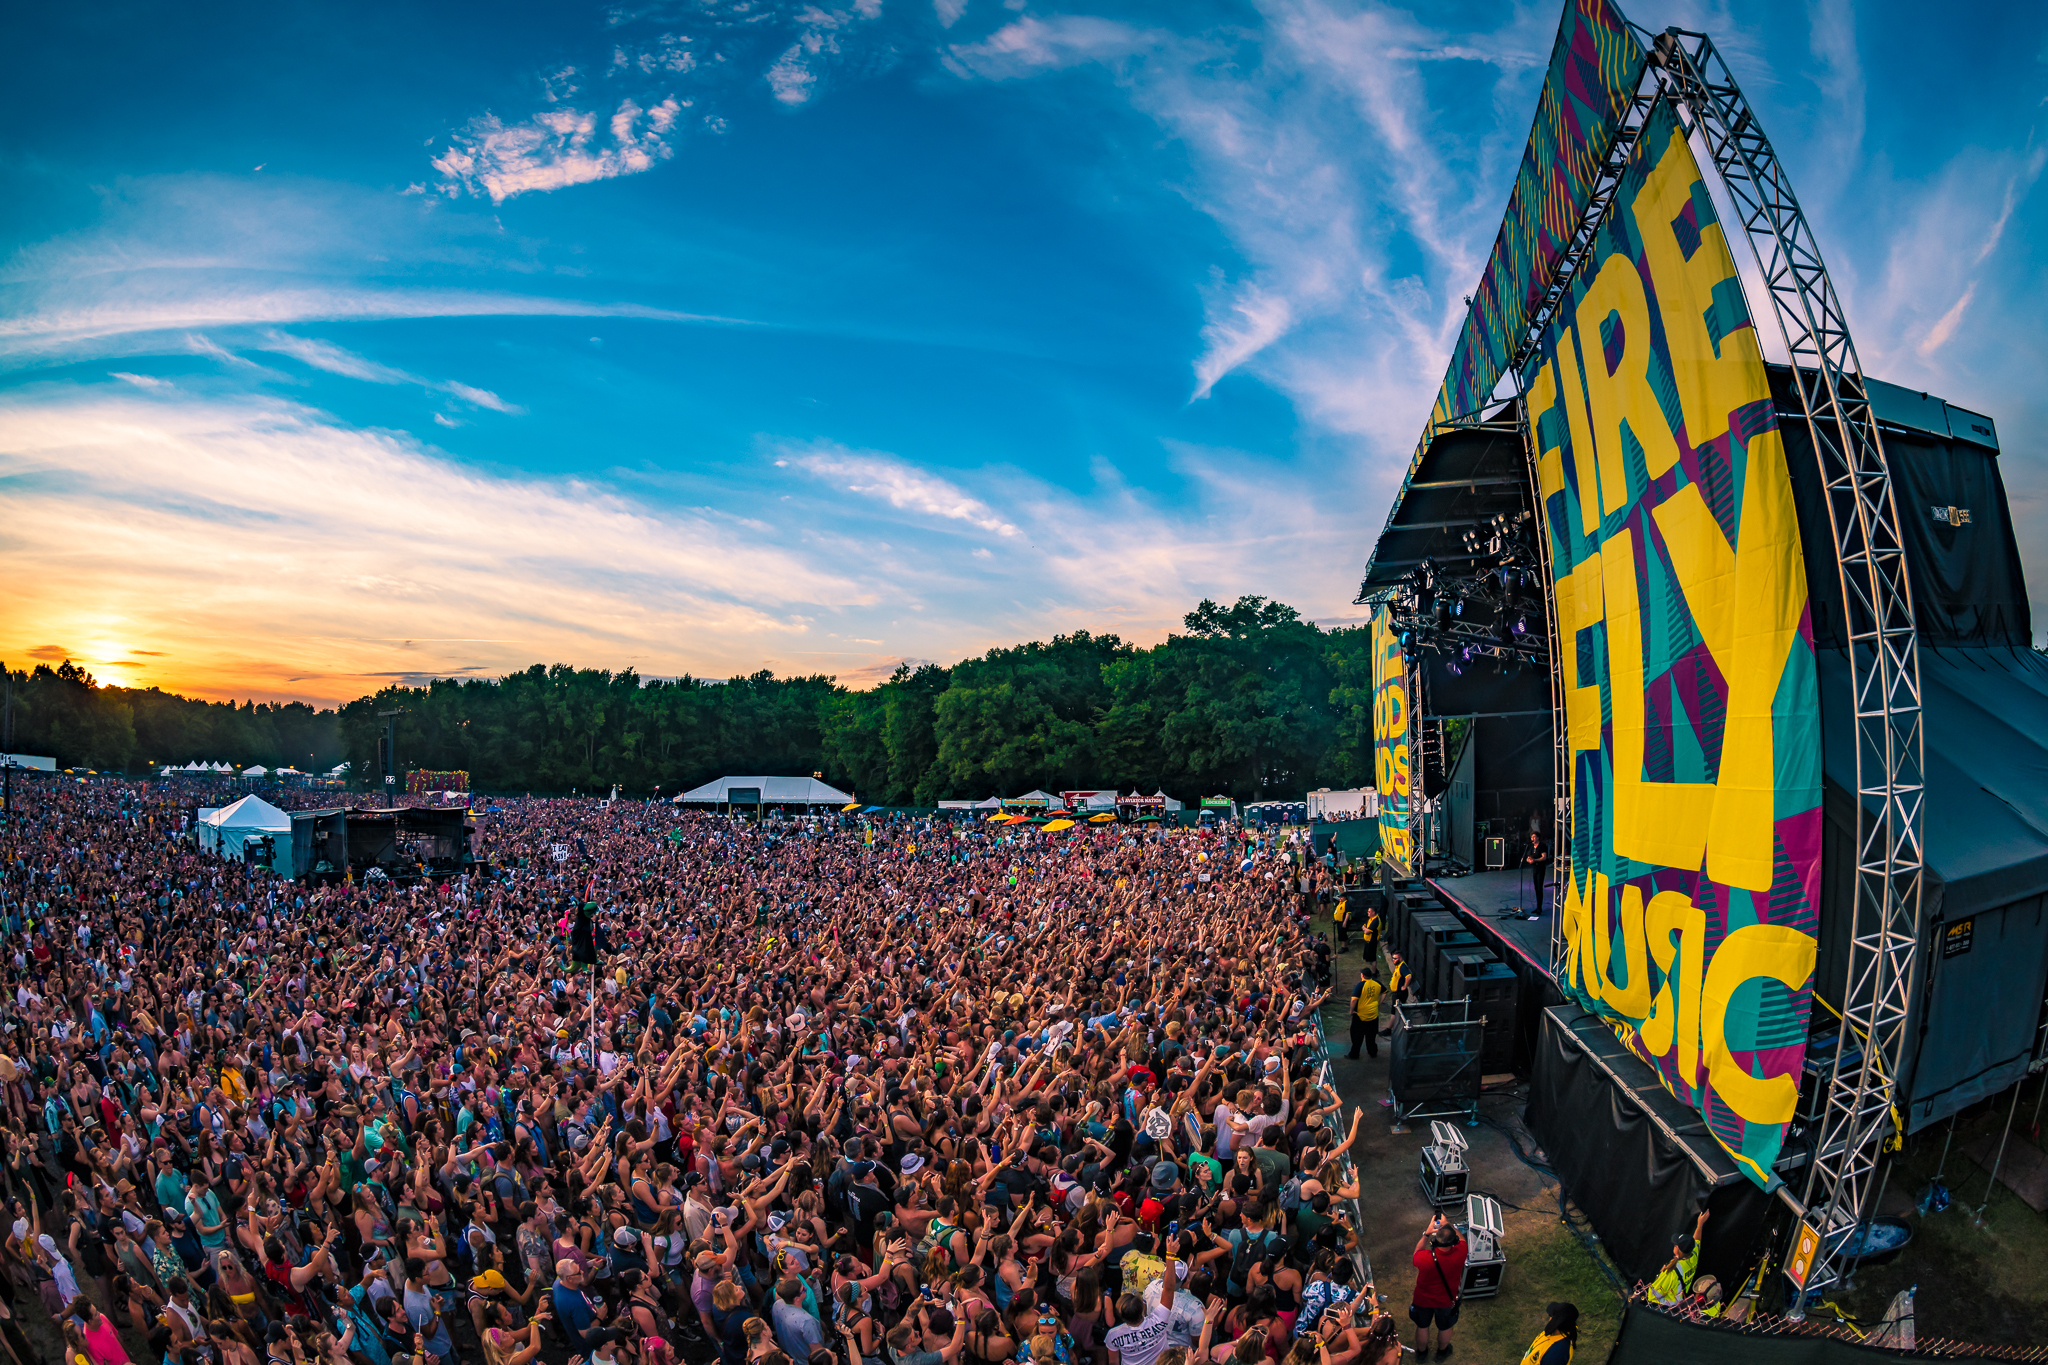 A packed audience faces a large stage at The Firefly Music Festival.